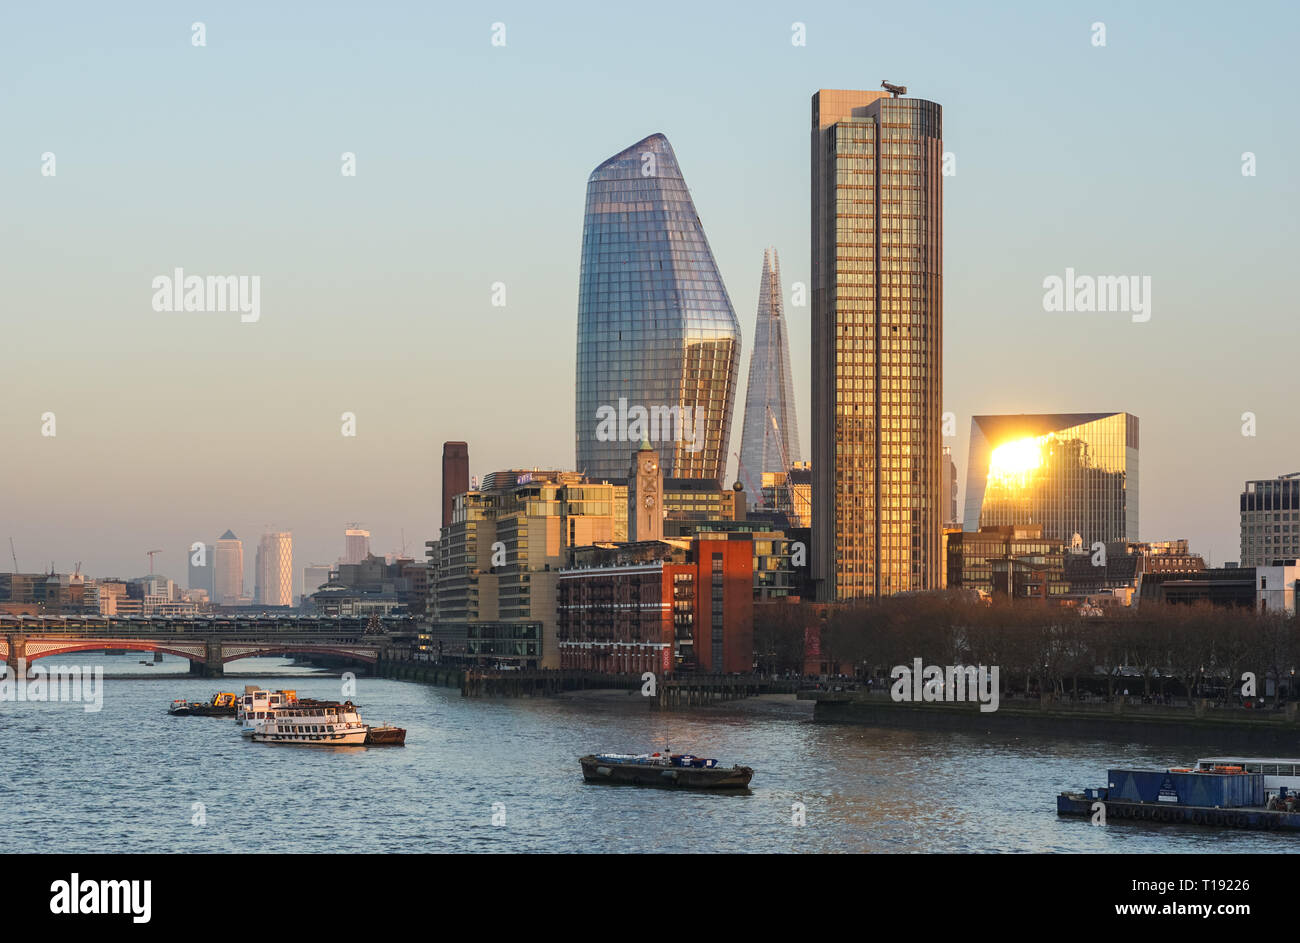 One Blackfriars, The Shard and South Bank Tower skyscrapers with Canary Wharf in the background, London England United Kingdom UK Stock Photo